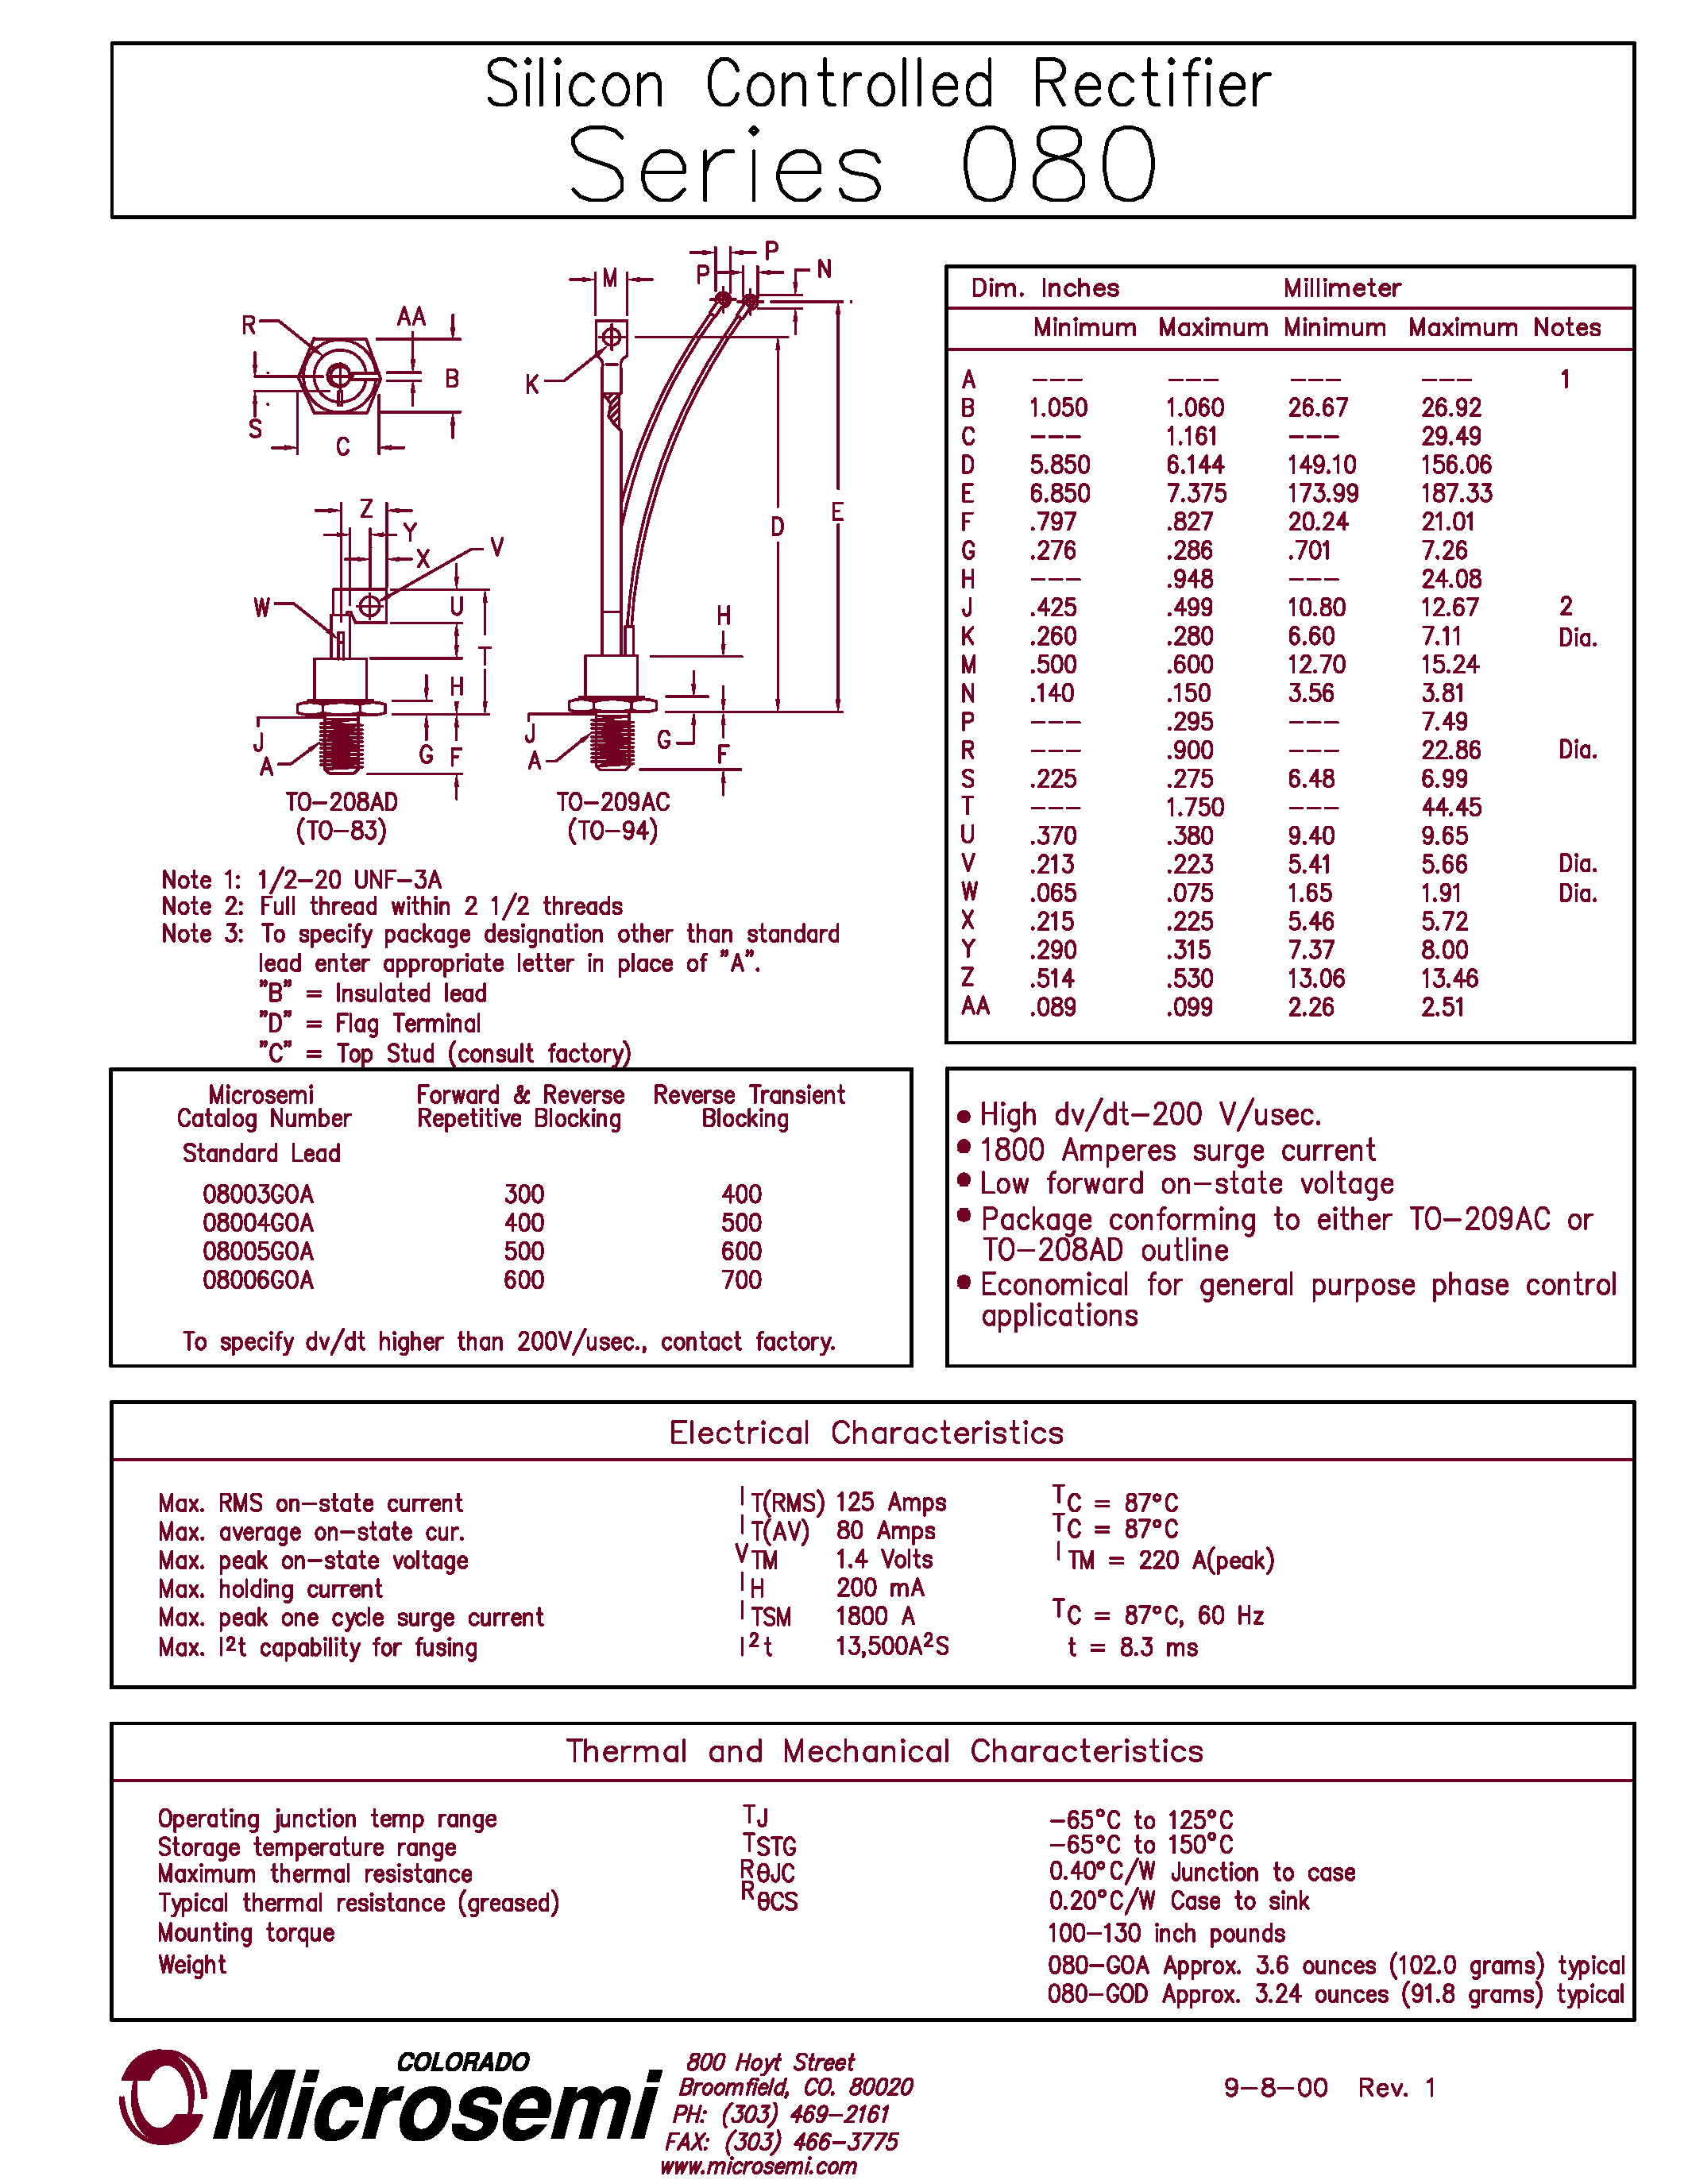 Datasheet 08005GOC - Silicon Controlled Rectifier page 1